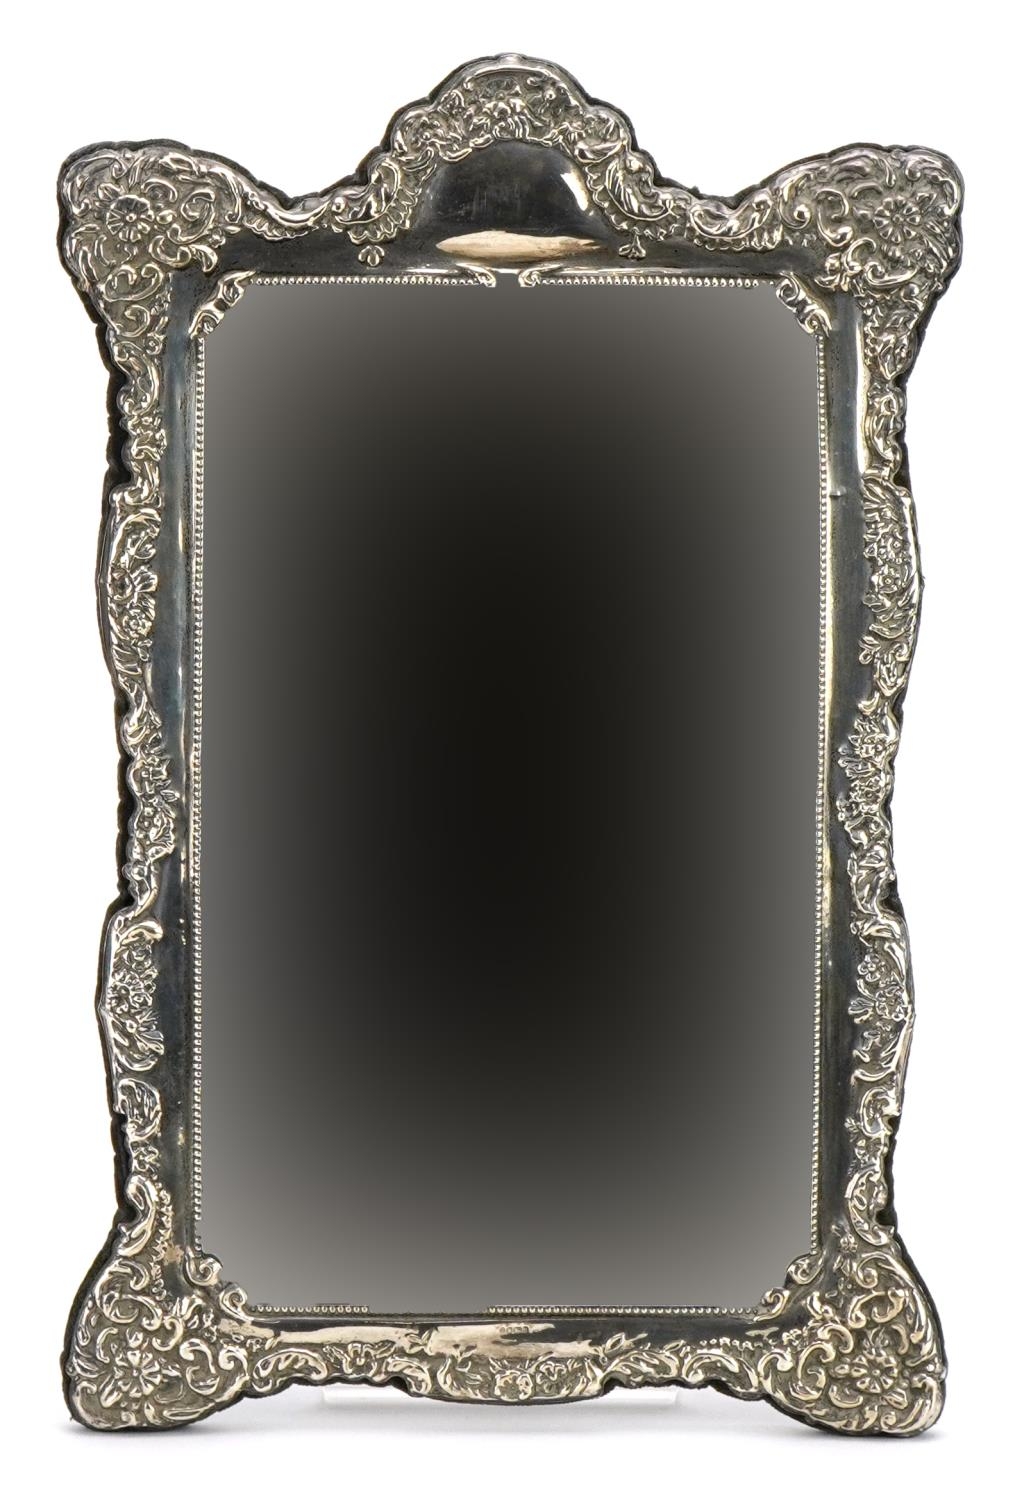 Francis Howard Ltd, Rectangular silver mounted mirror with bevelled glass, Sheffield 1992, 37cm x